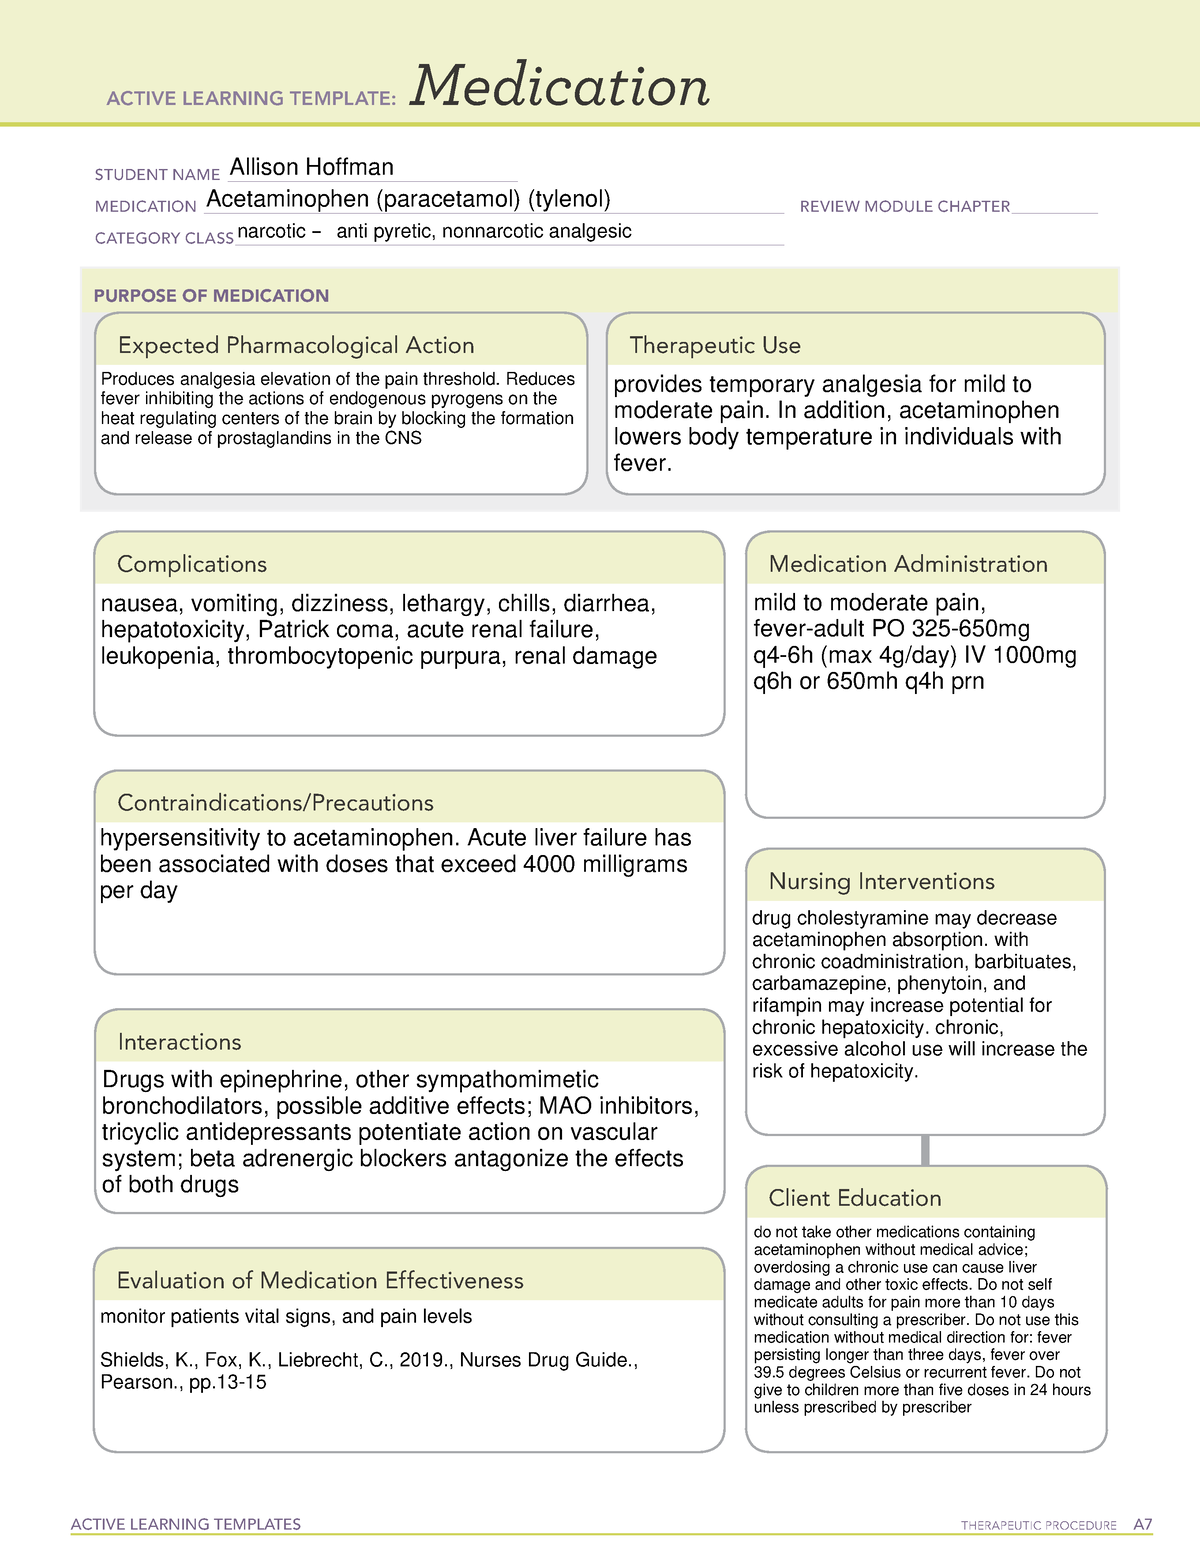 acetaminophen-med-card-active-learning-templates-therapeutic